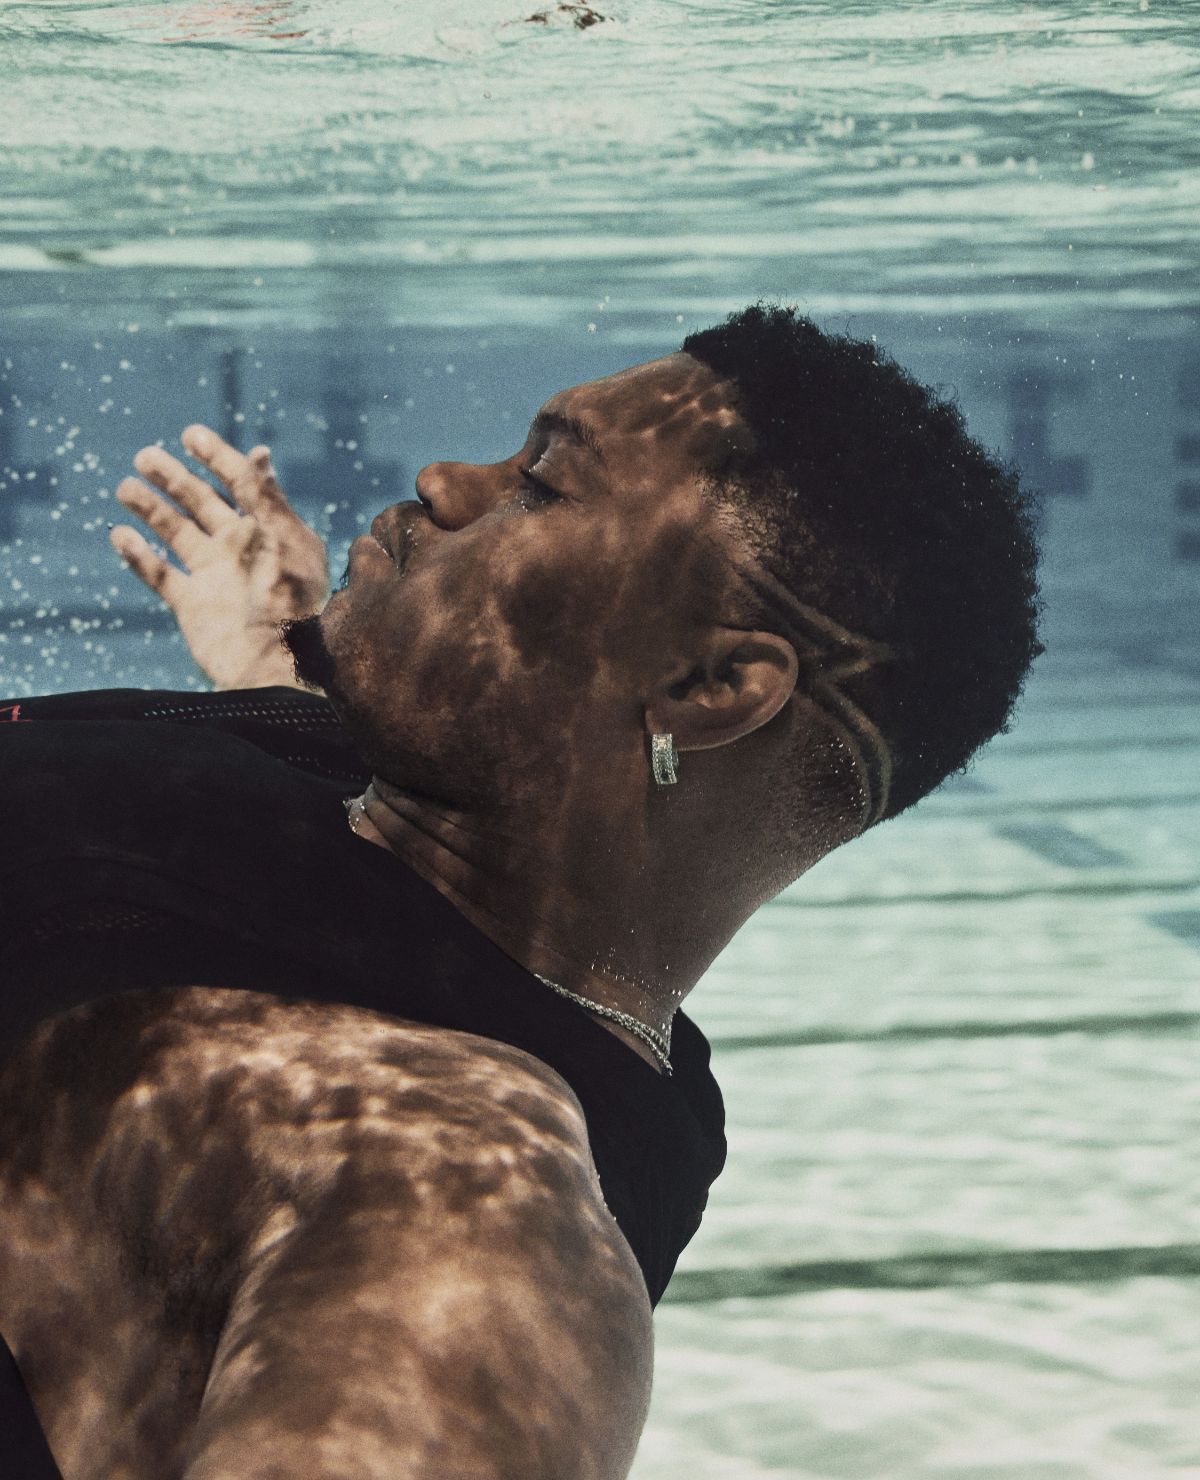 Zion's face and arms outstretched face up, underwater in a pool